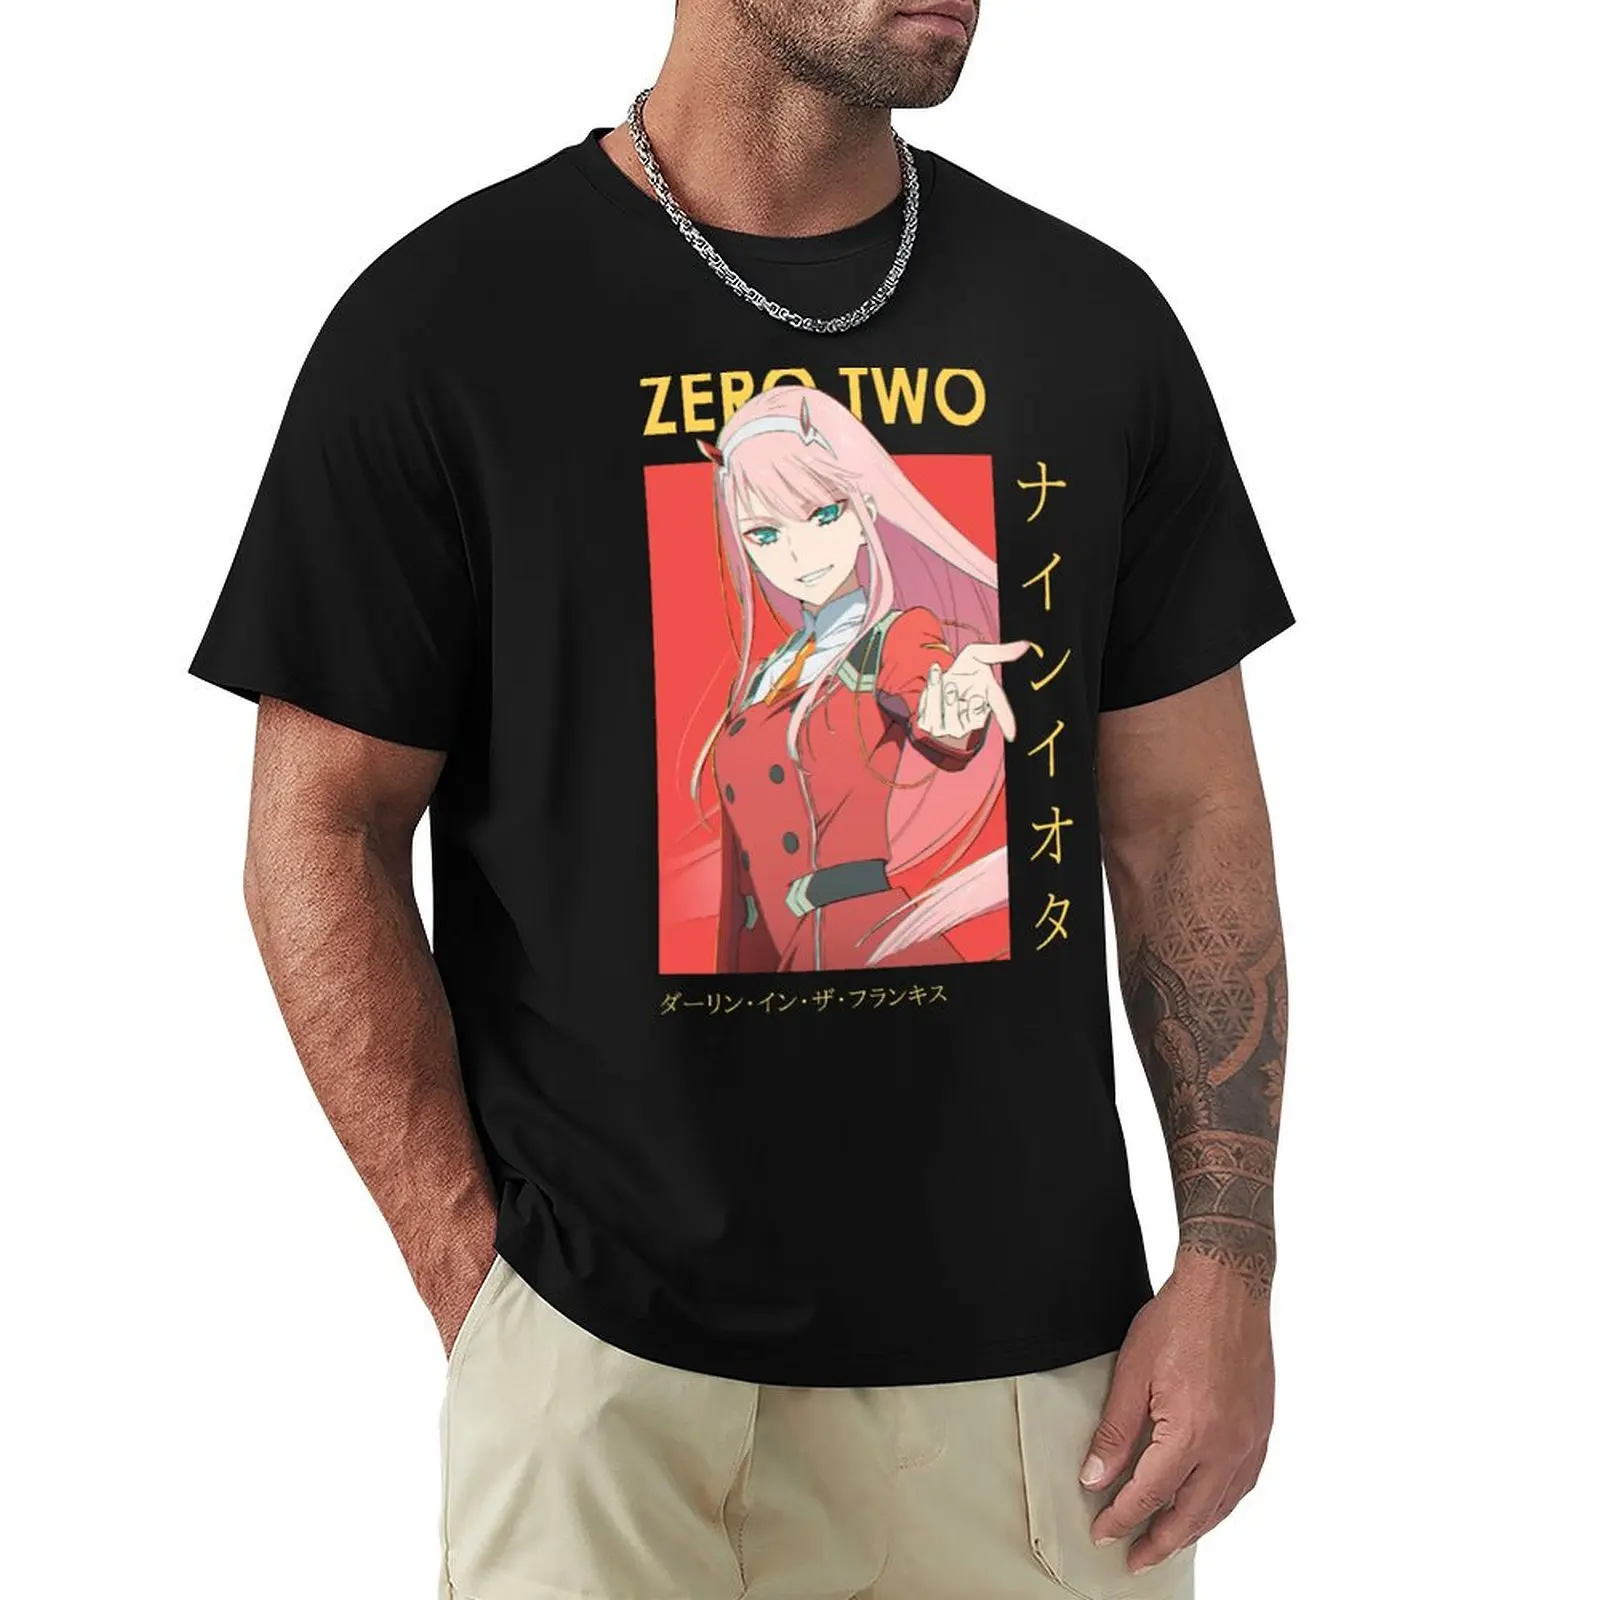 

Zero Two 002 DARLING in the FRANXX Card Anime T-Shirt new edition Aesthetic clothing sports fans anime slim fit t shirts for men